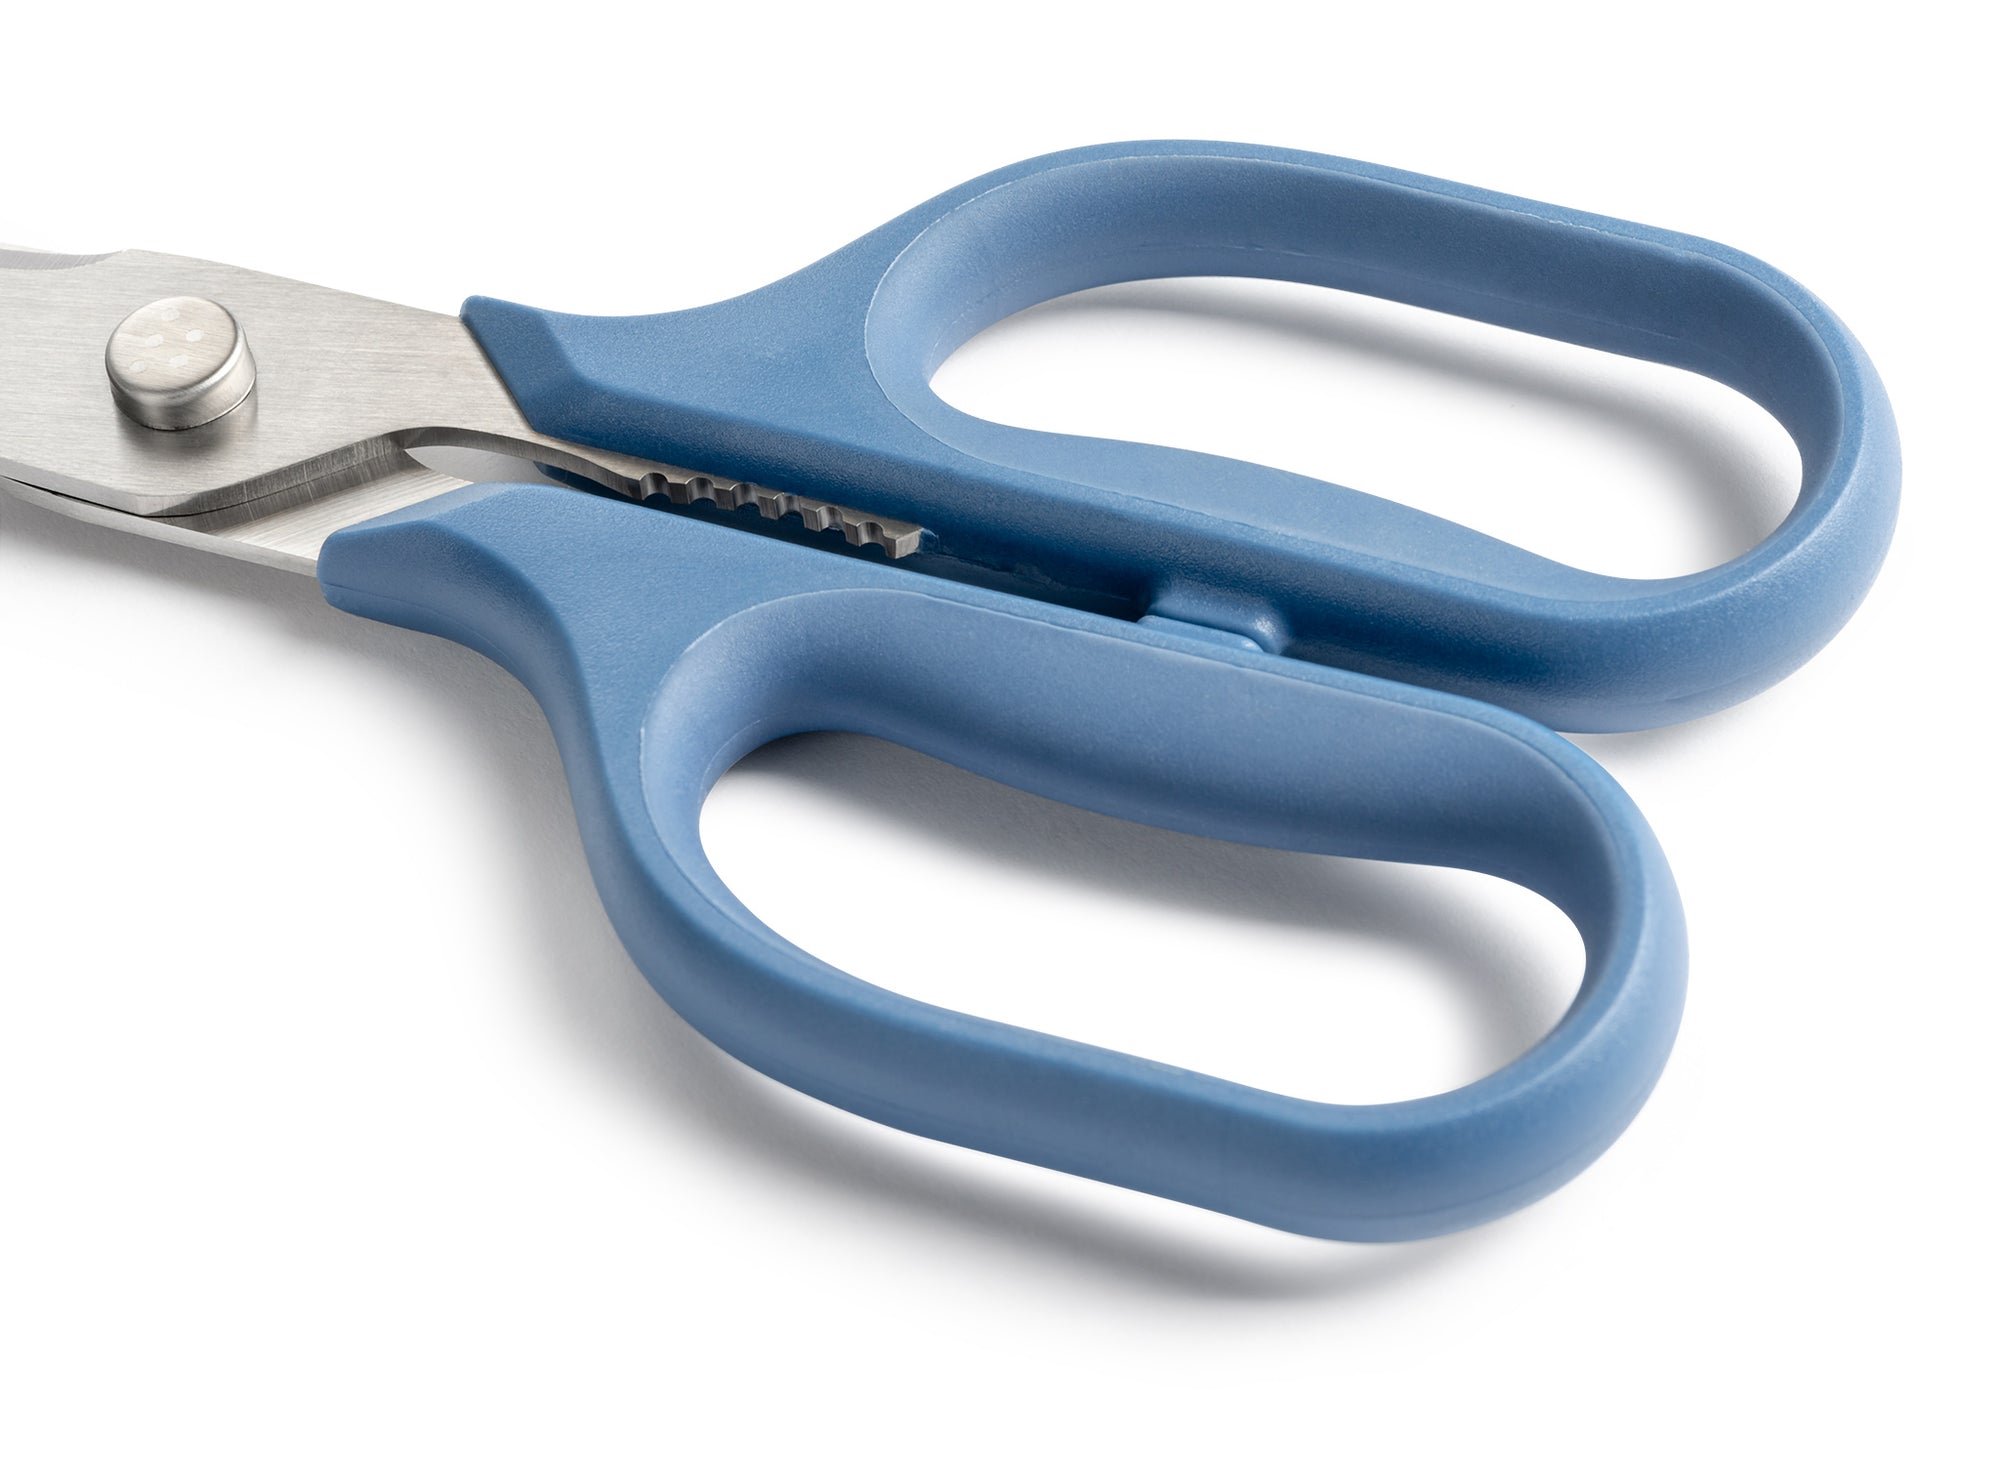 The 7 Best Kitchen Shears of 2023